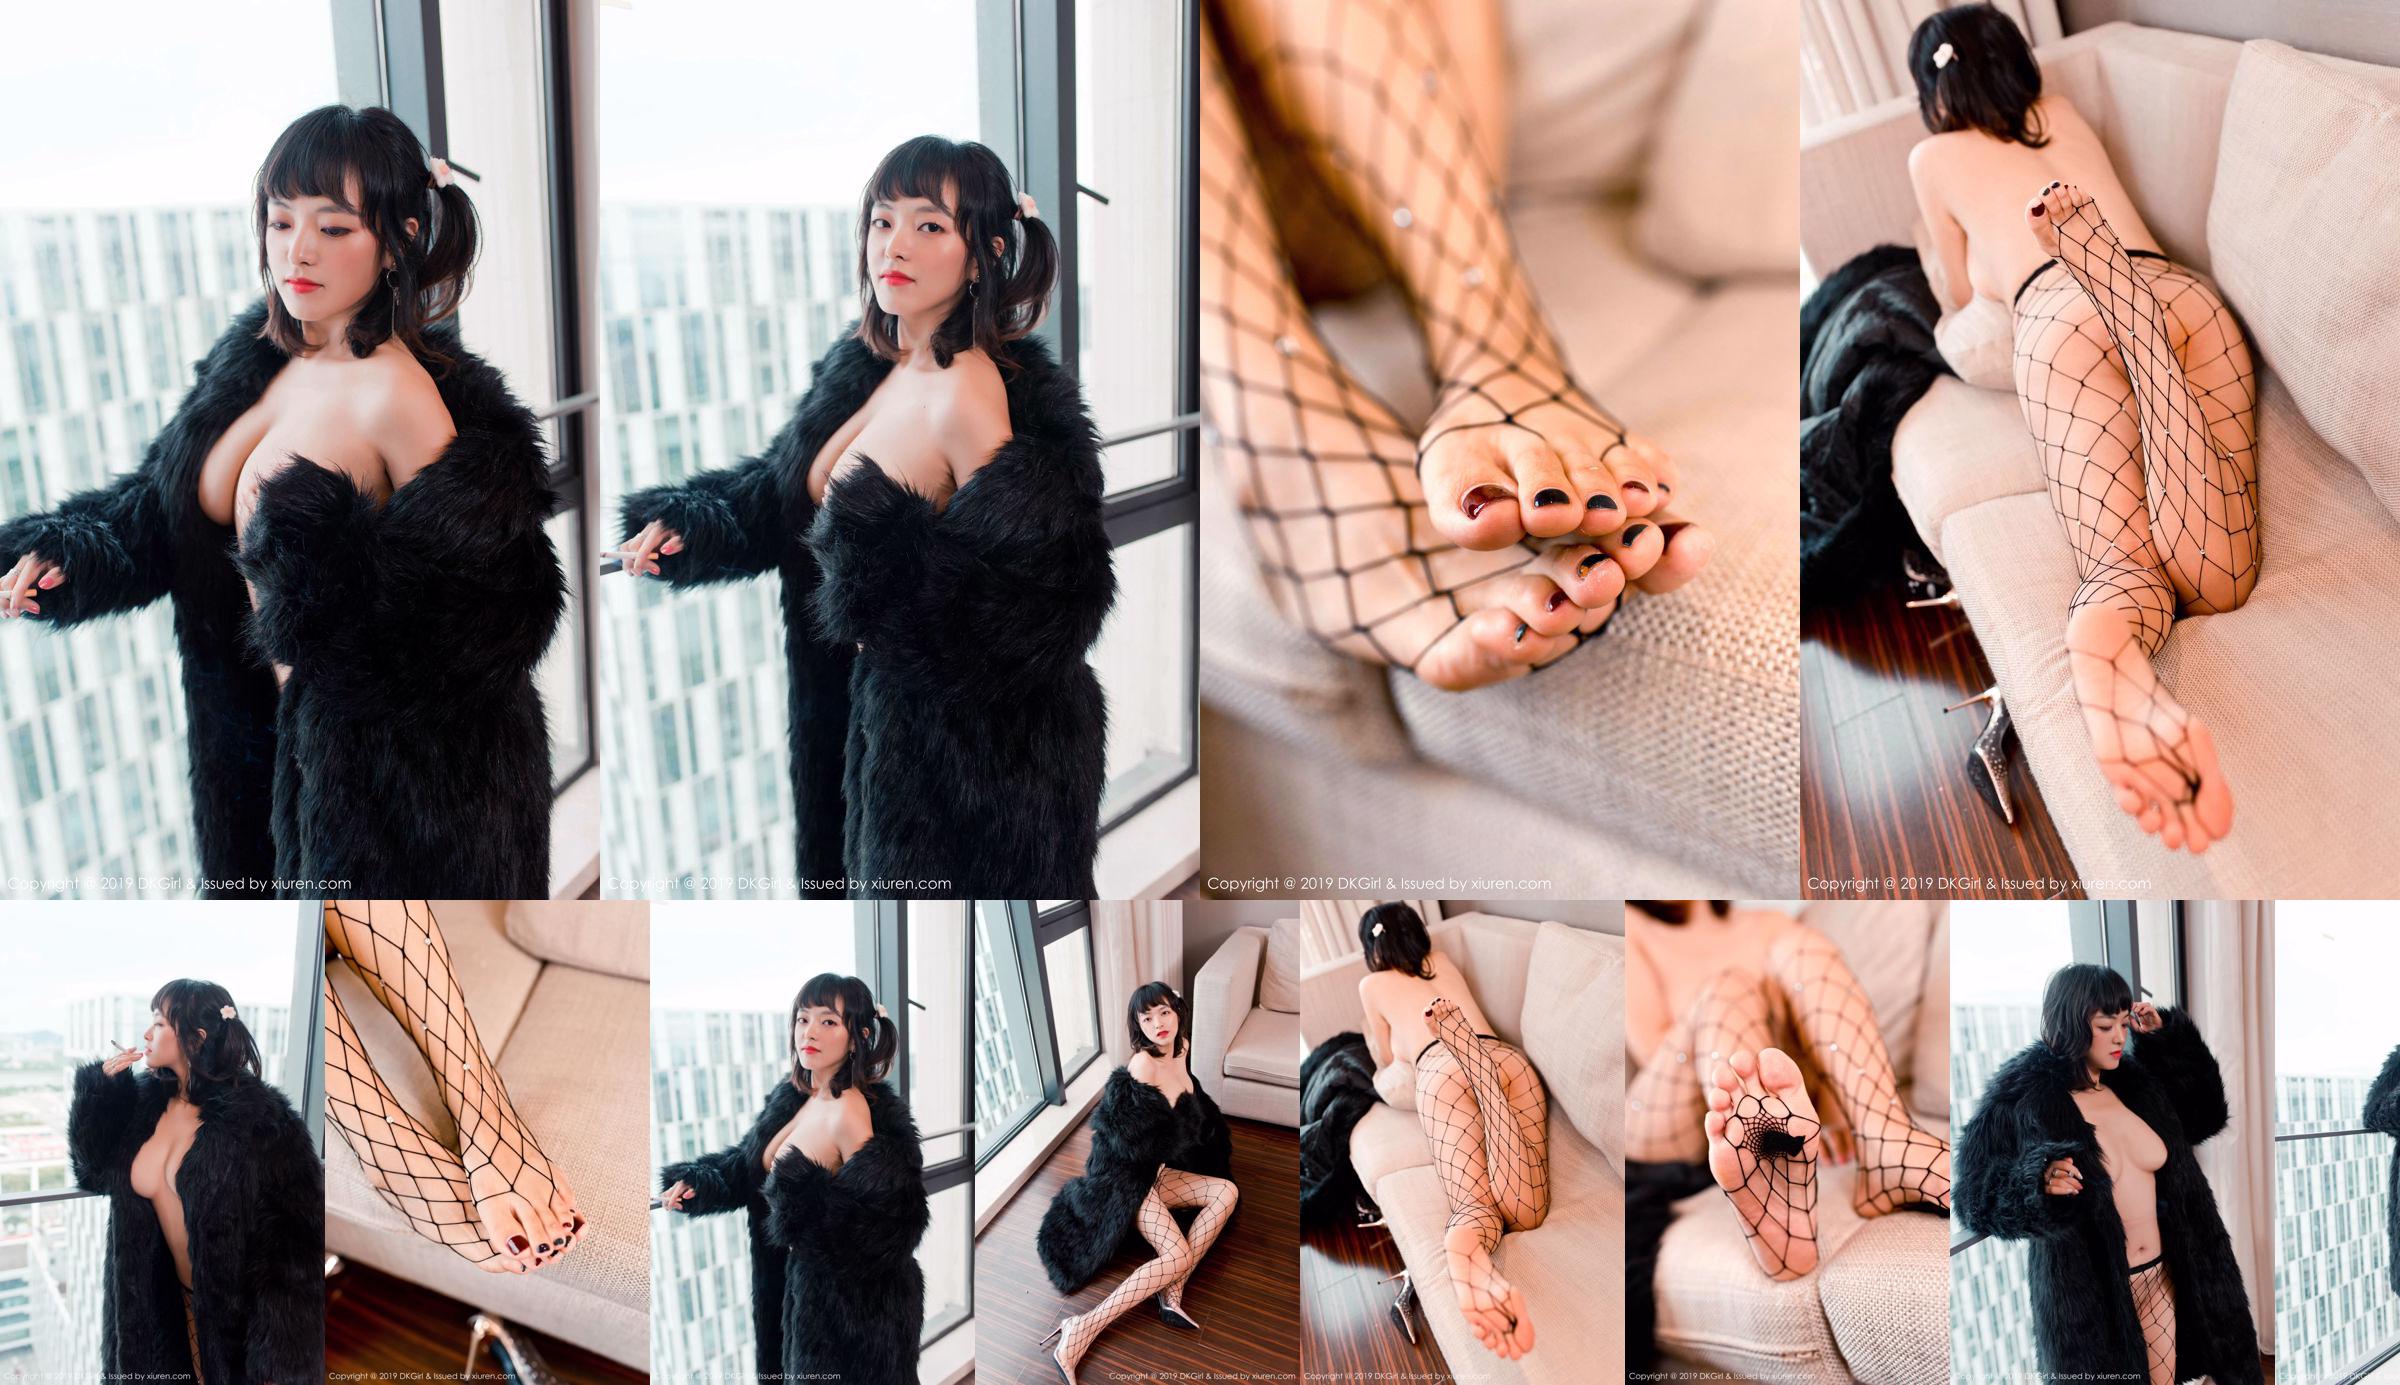 Zhang Huahua "Mature Woman in Fur Net Stockings" [DKGirl] Vol.118 No.a4ee56 Page 2